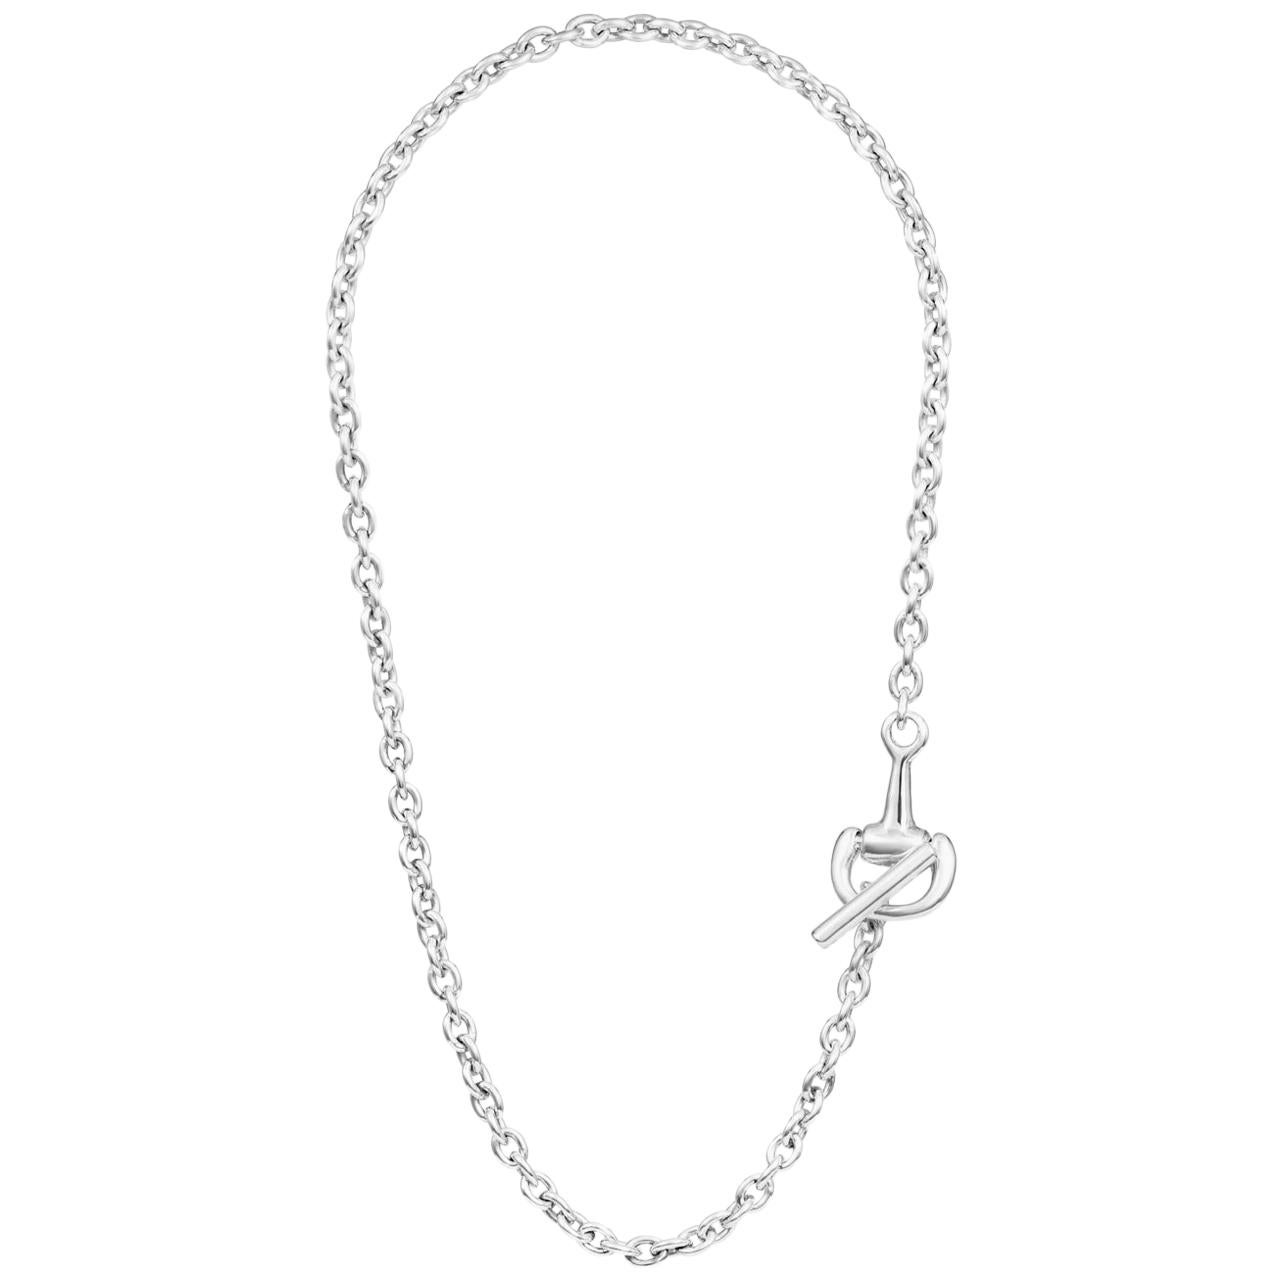 Vincent Peach Equestrian Sterling Silver Snaffle Bit Chain Link Necklace For Sale